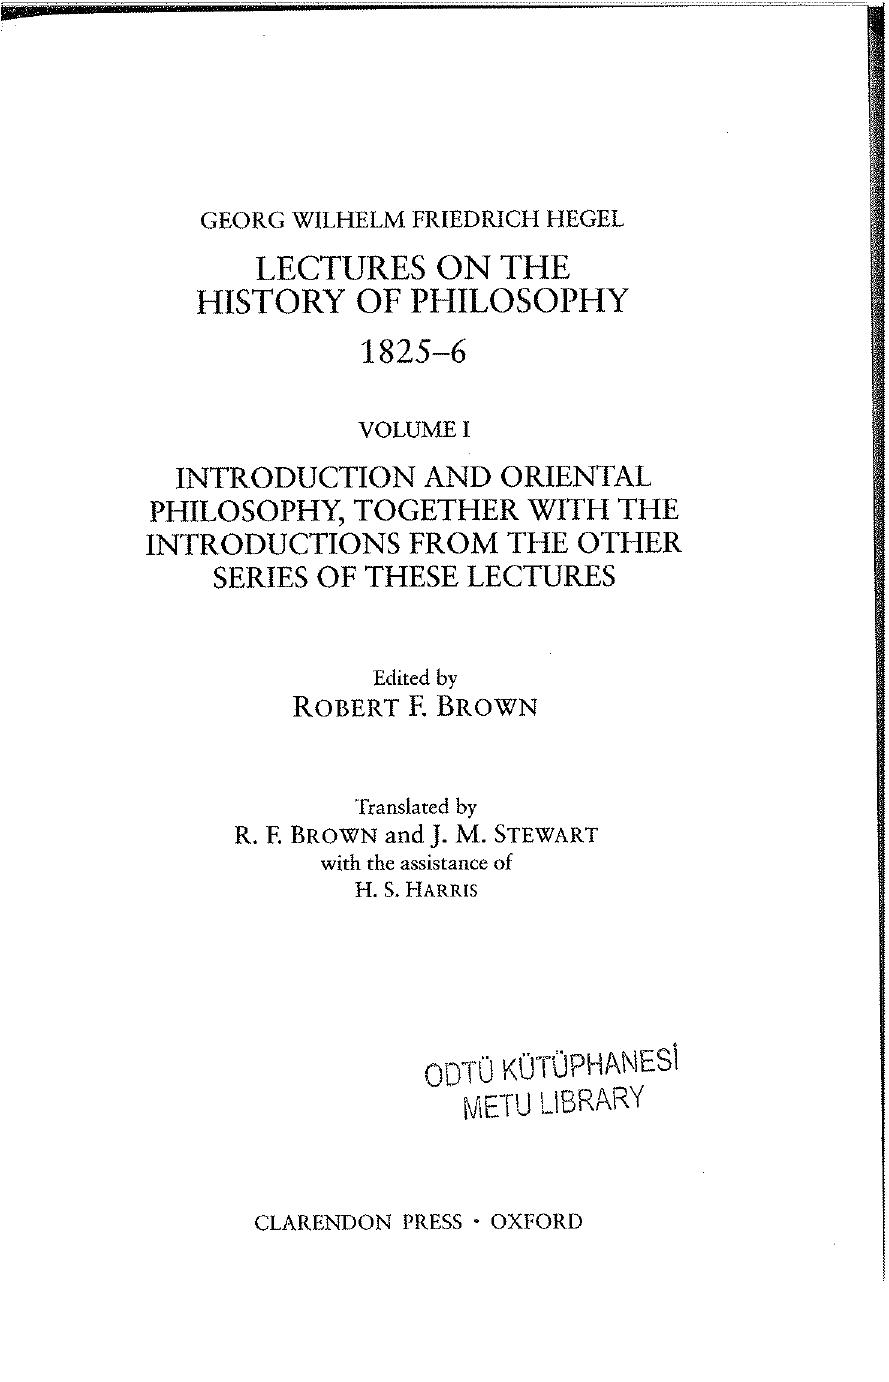 Hegel Lectures on the History of Philosophy 1825-6 Volume I Introduction and Oriental Philosophy (Georg Wilhelm Friedrich Hegel)